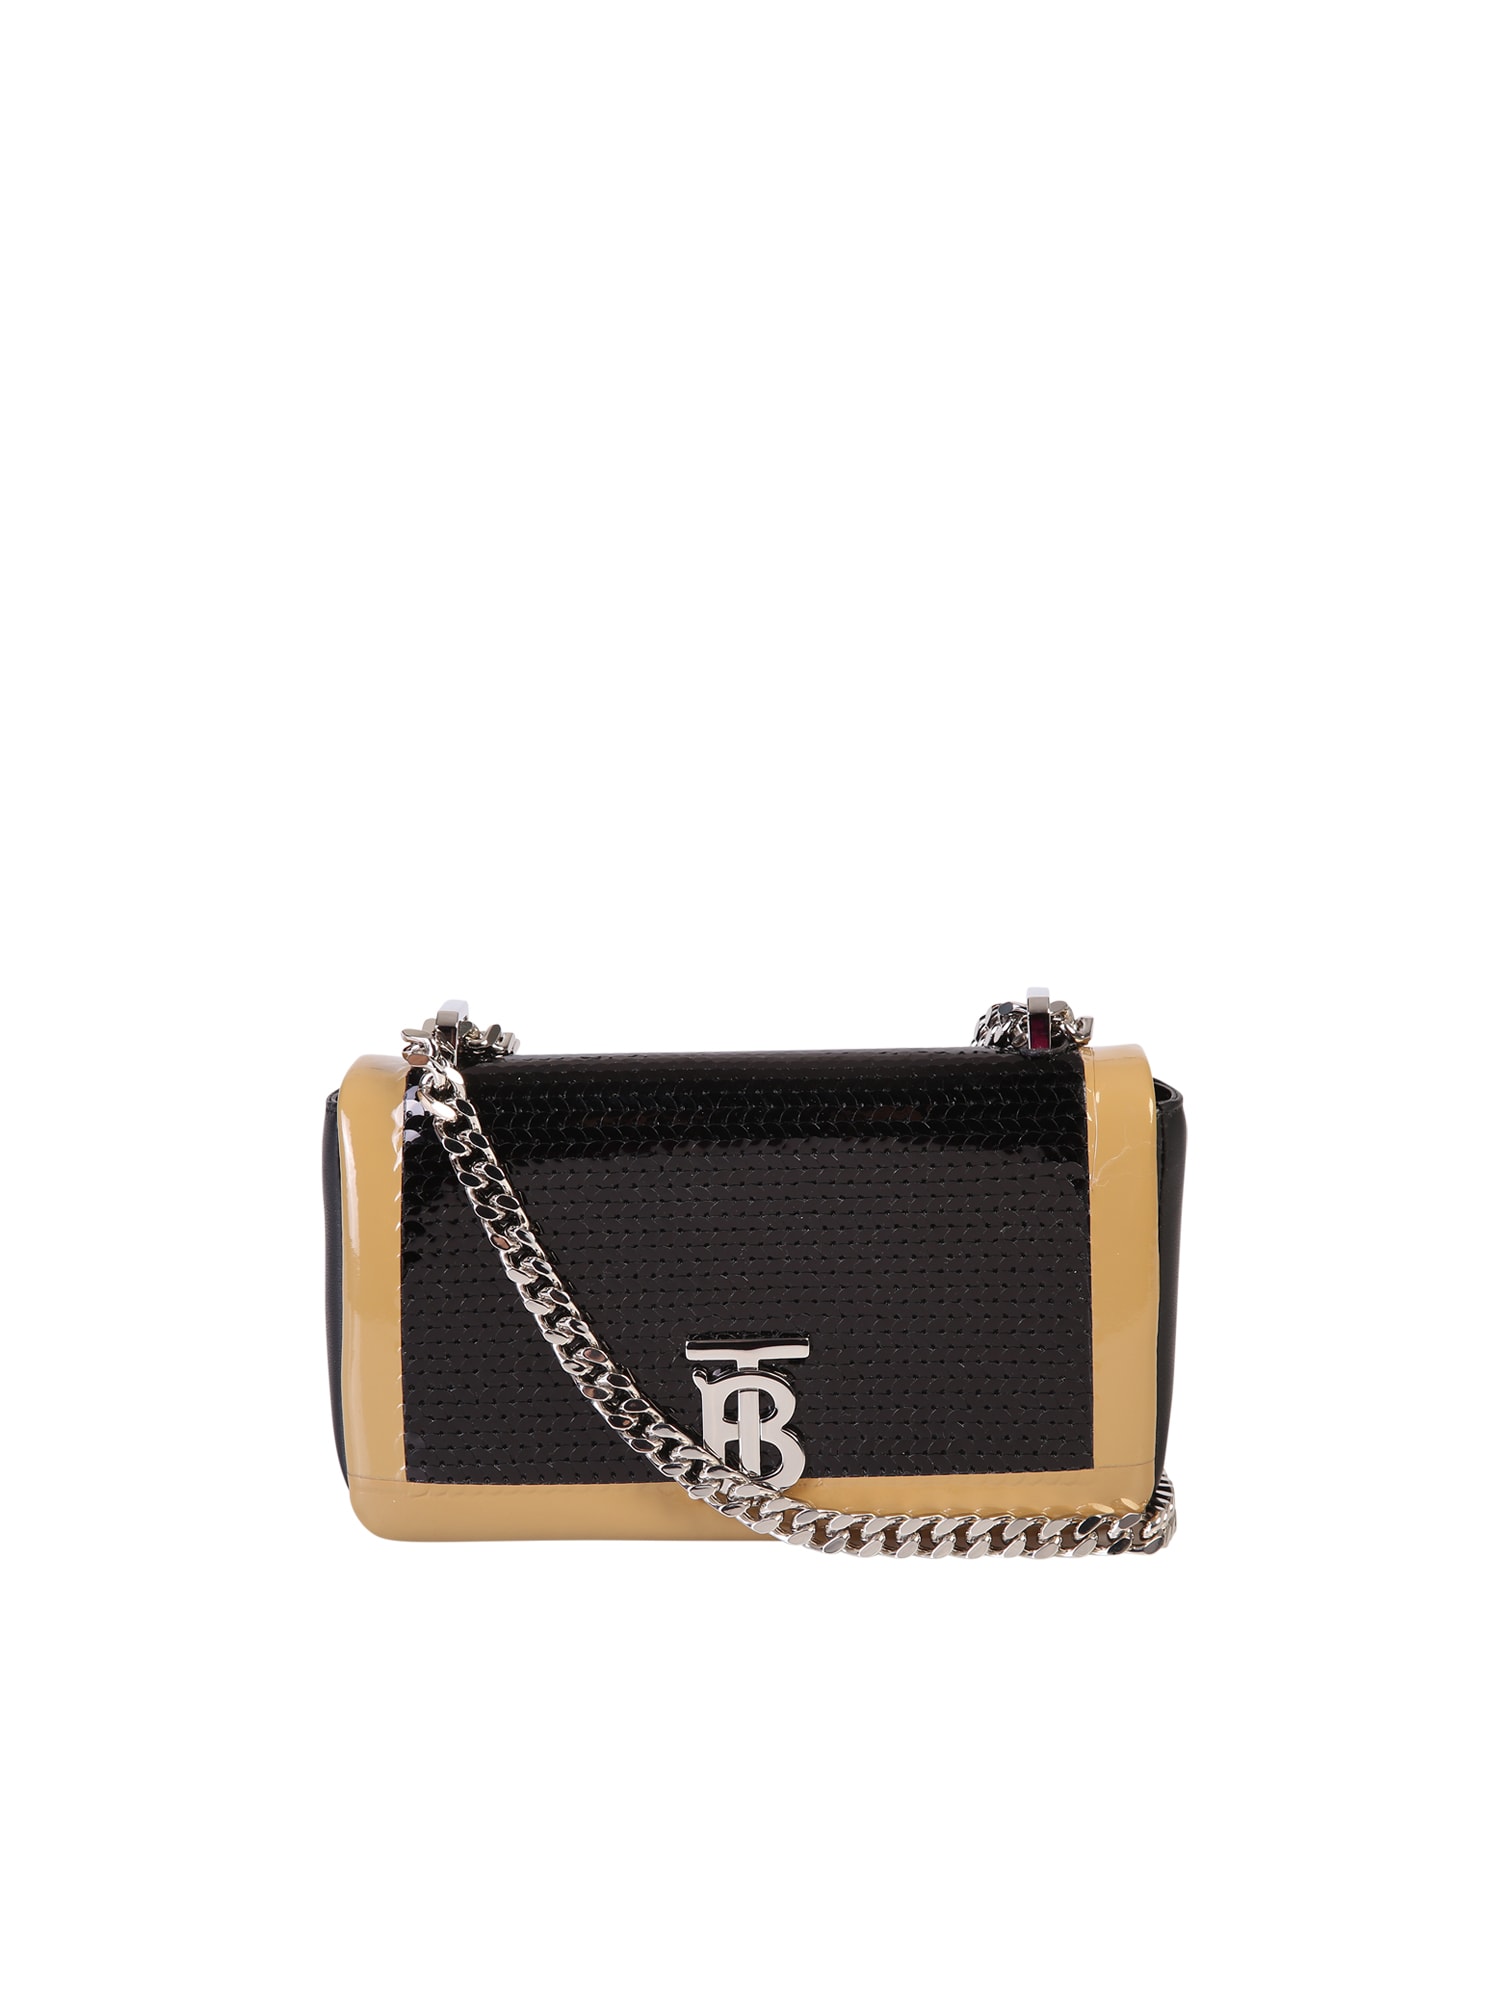 Burberry Sequined Bag In Black